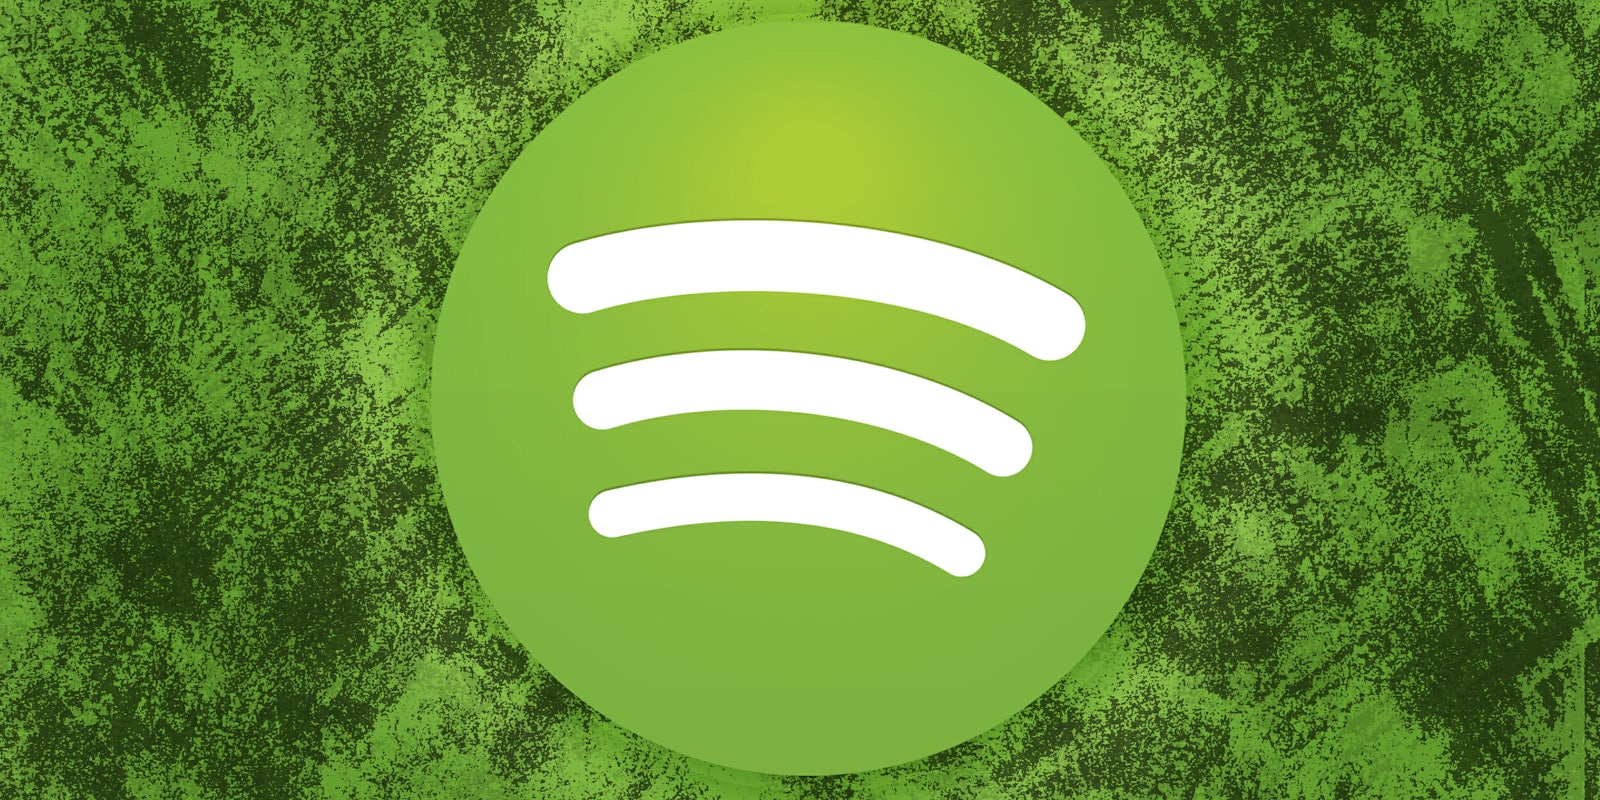 How to cancel your Spotify Premium